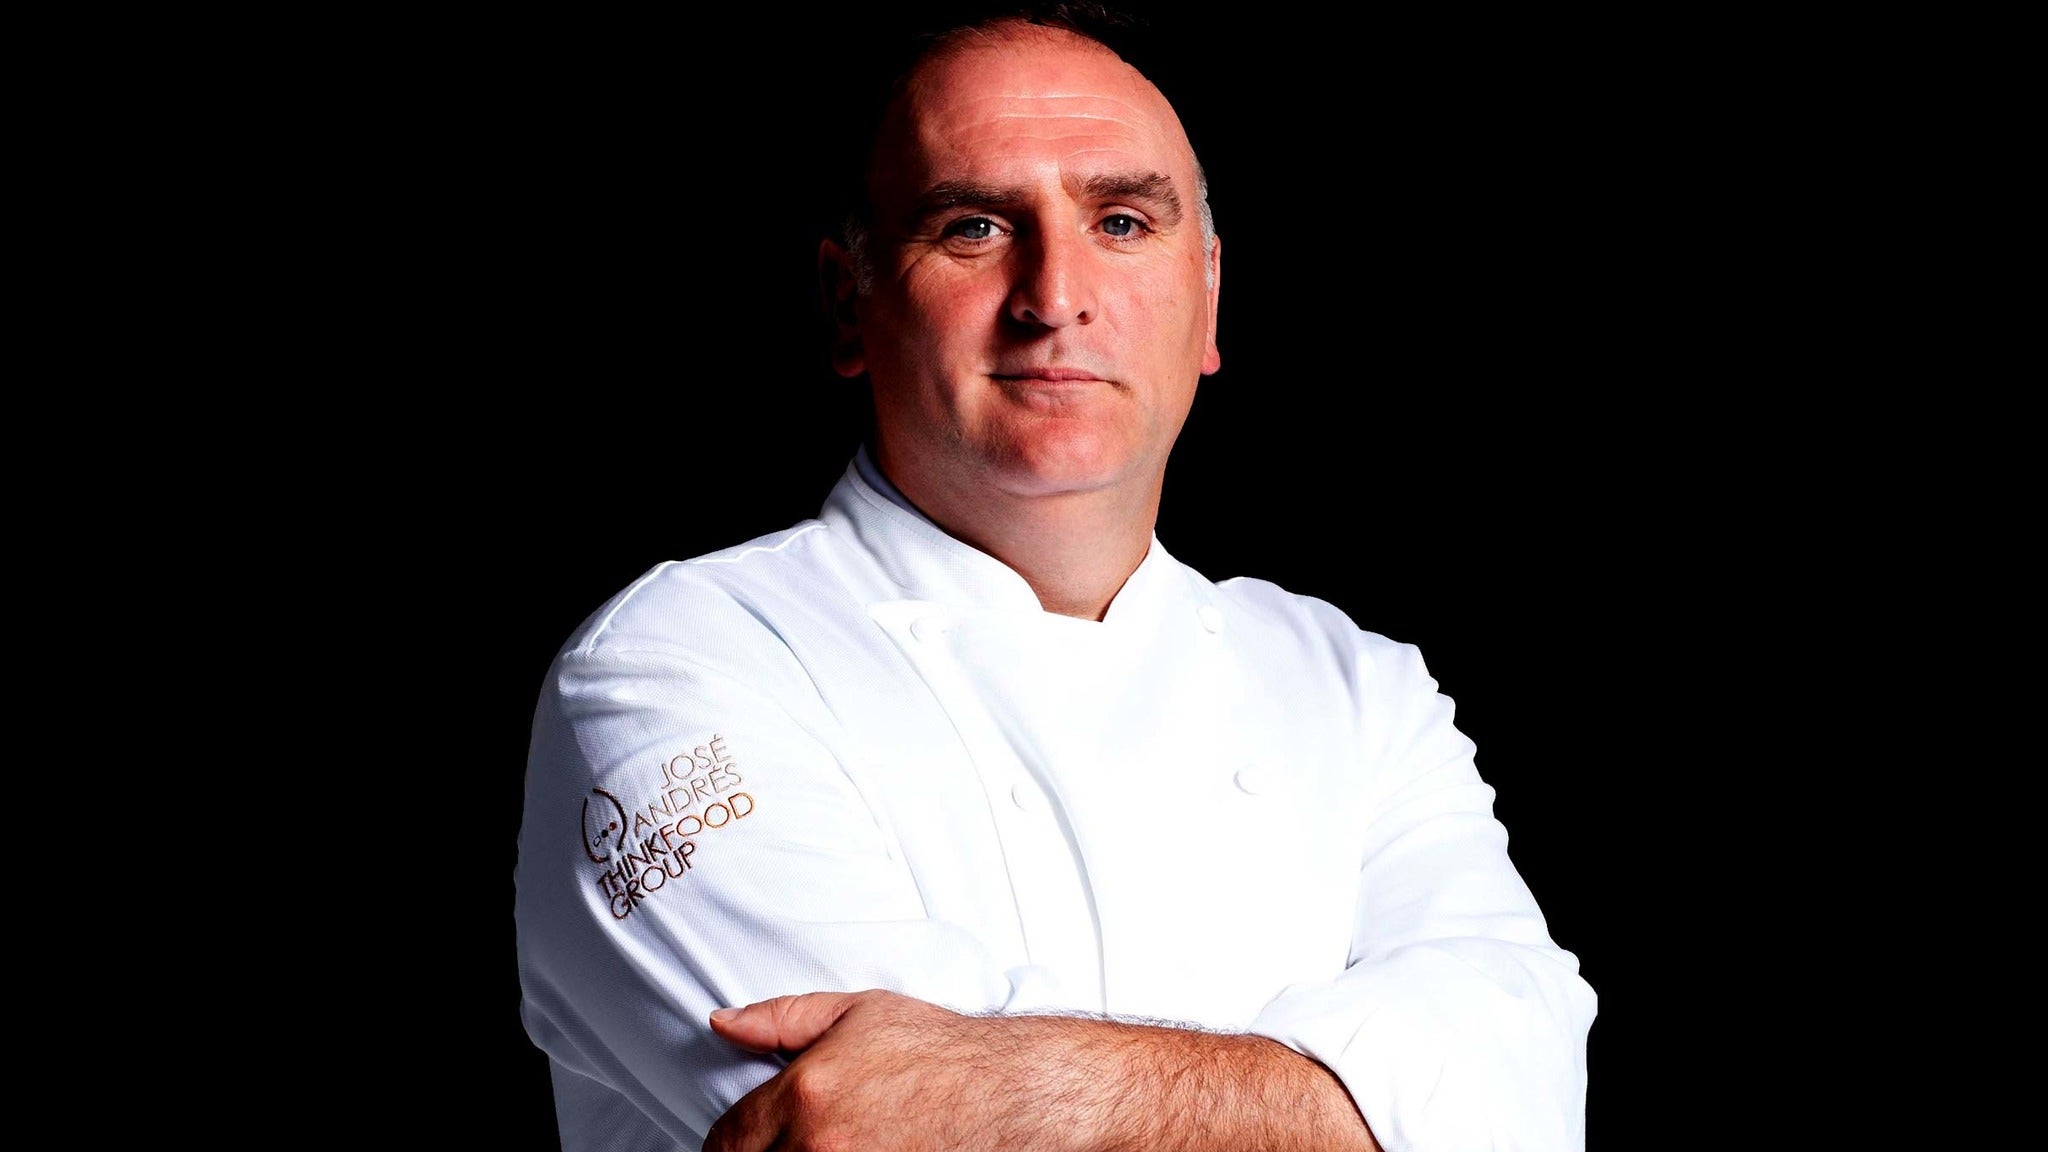 2022-2023 Bryan Series Featuring Jose Andres in Greensboro promo photo for Bryan Series presale offer code